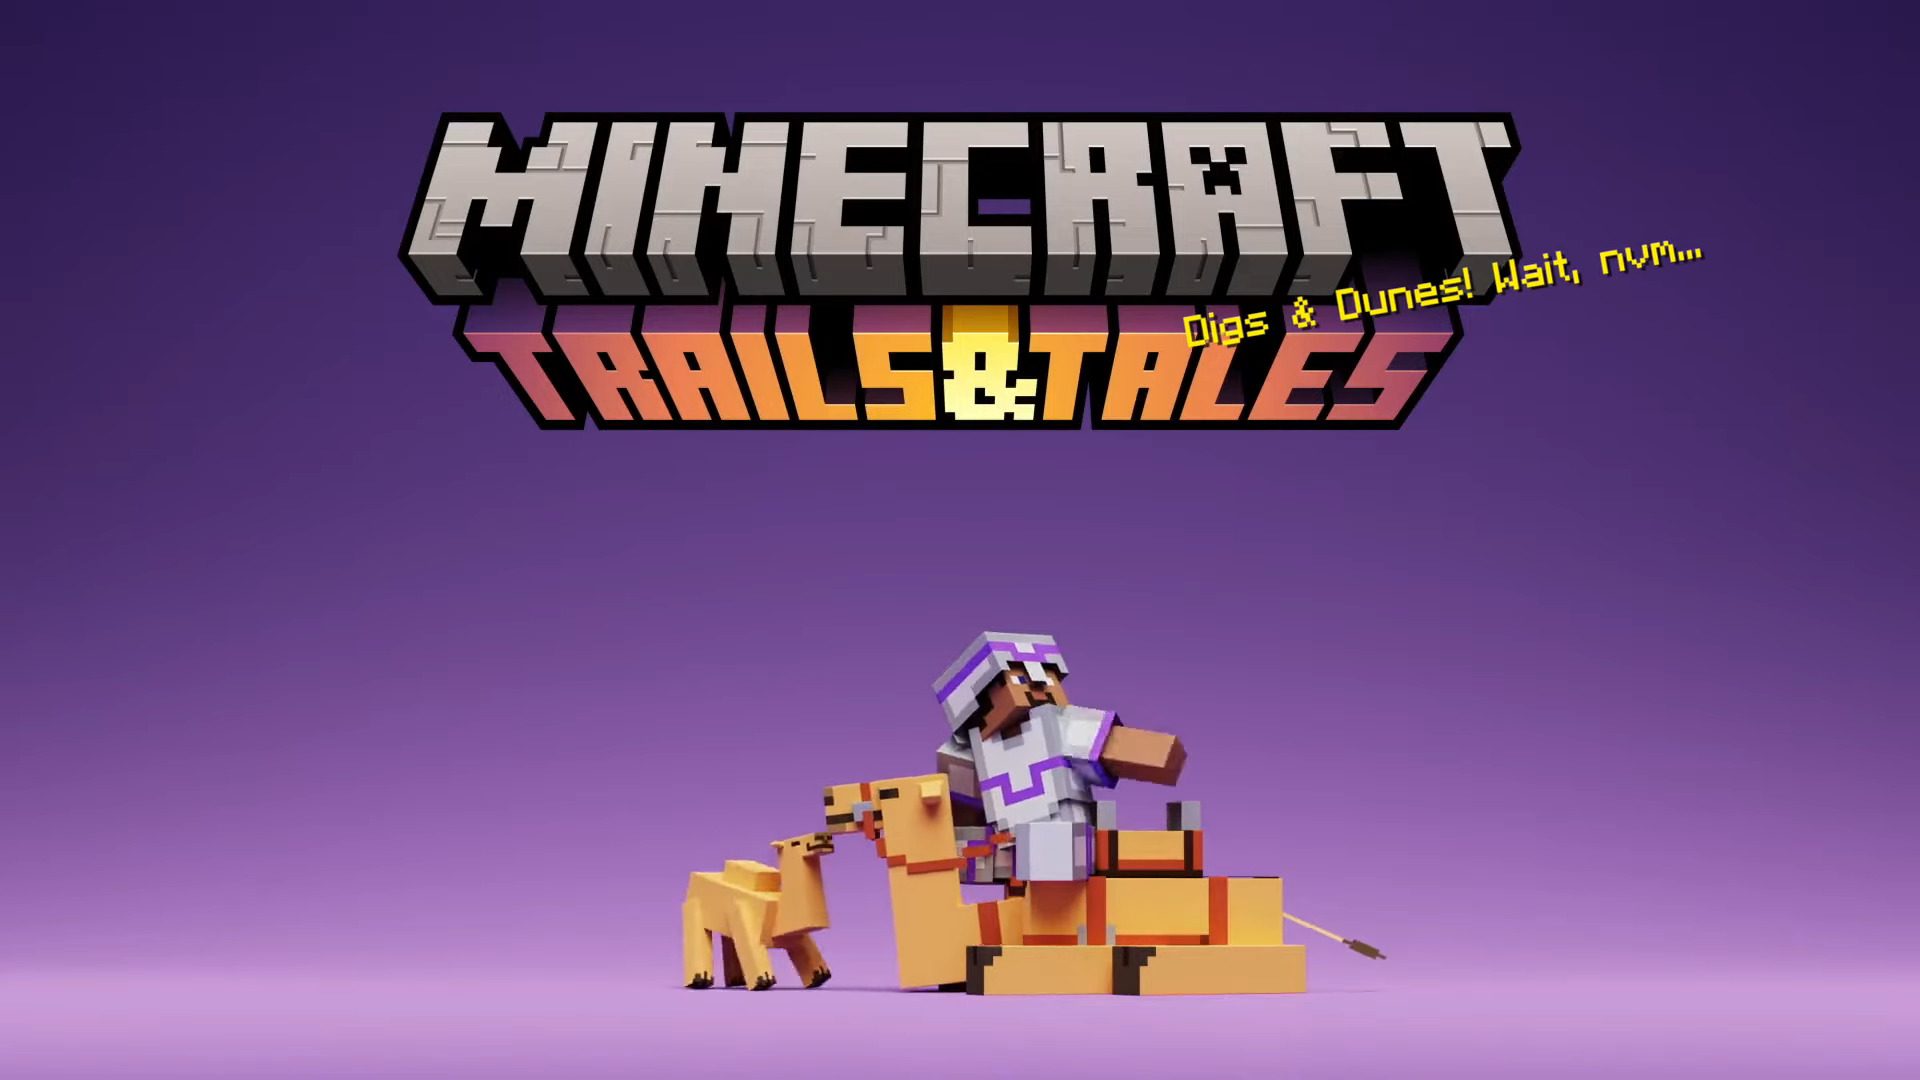 Download Minecraft PE 1.20.10 apk free: Trails and Tales